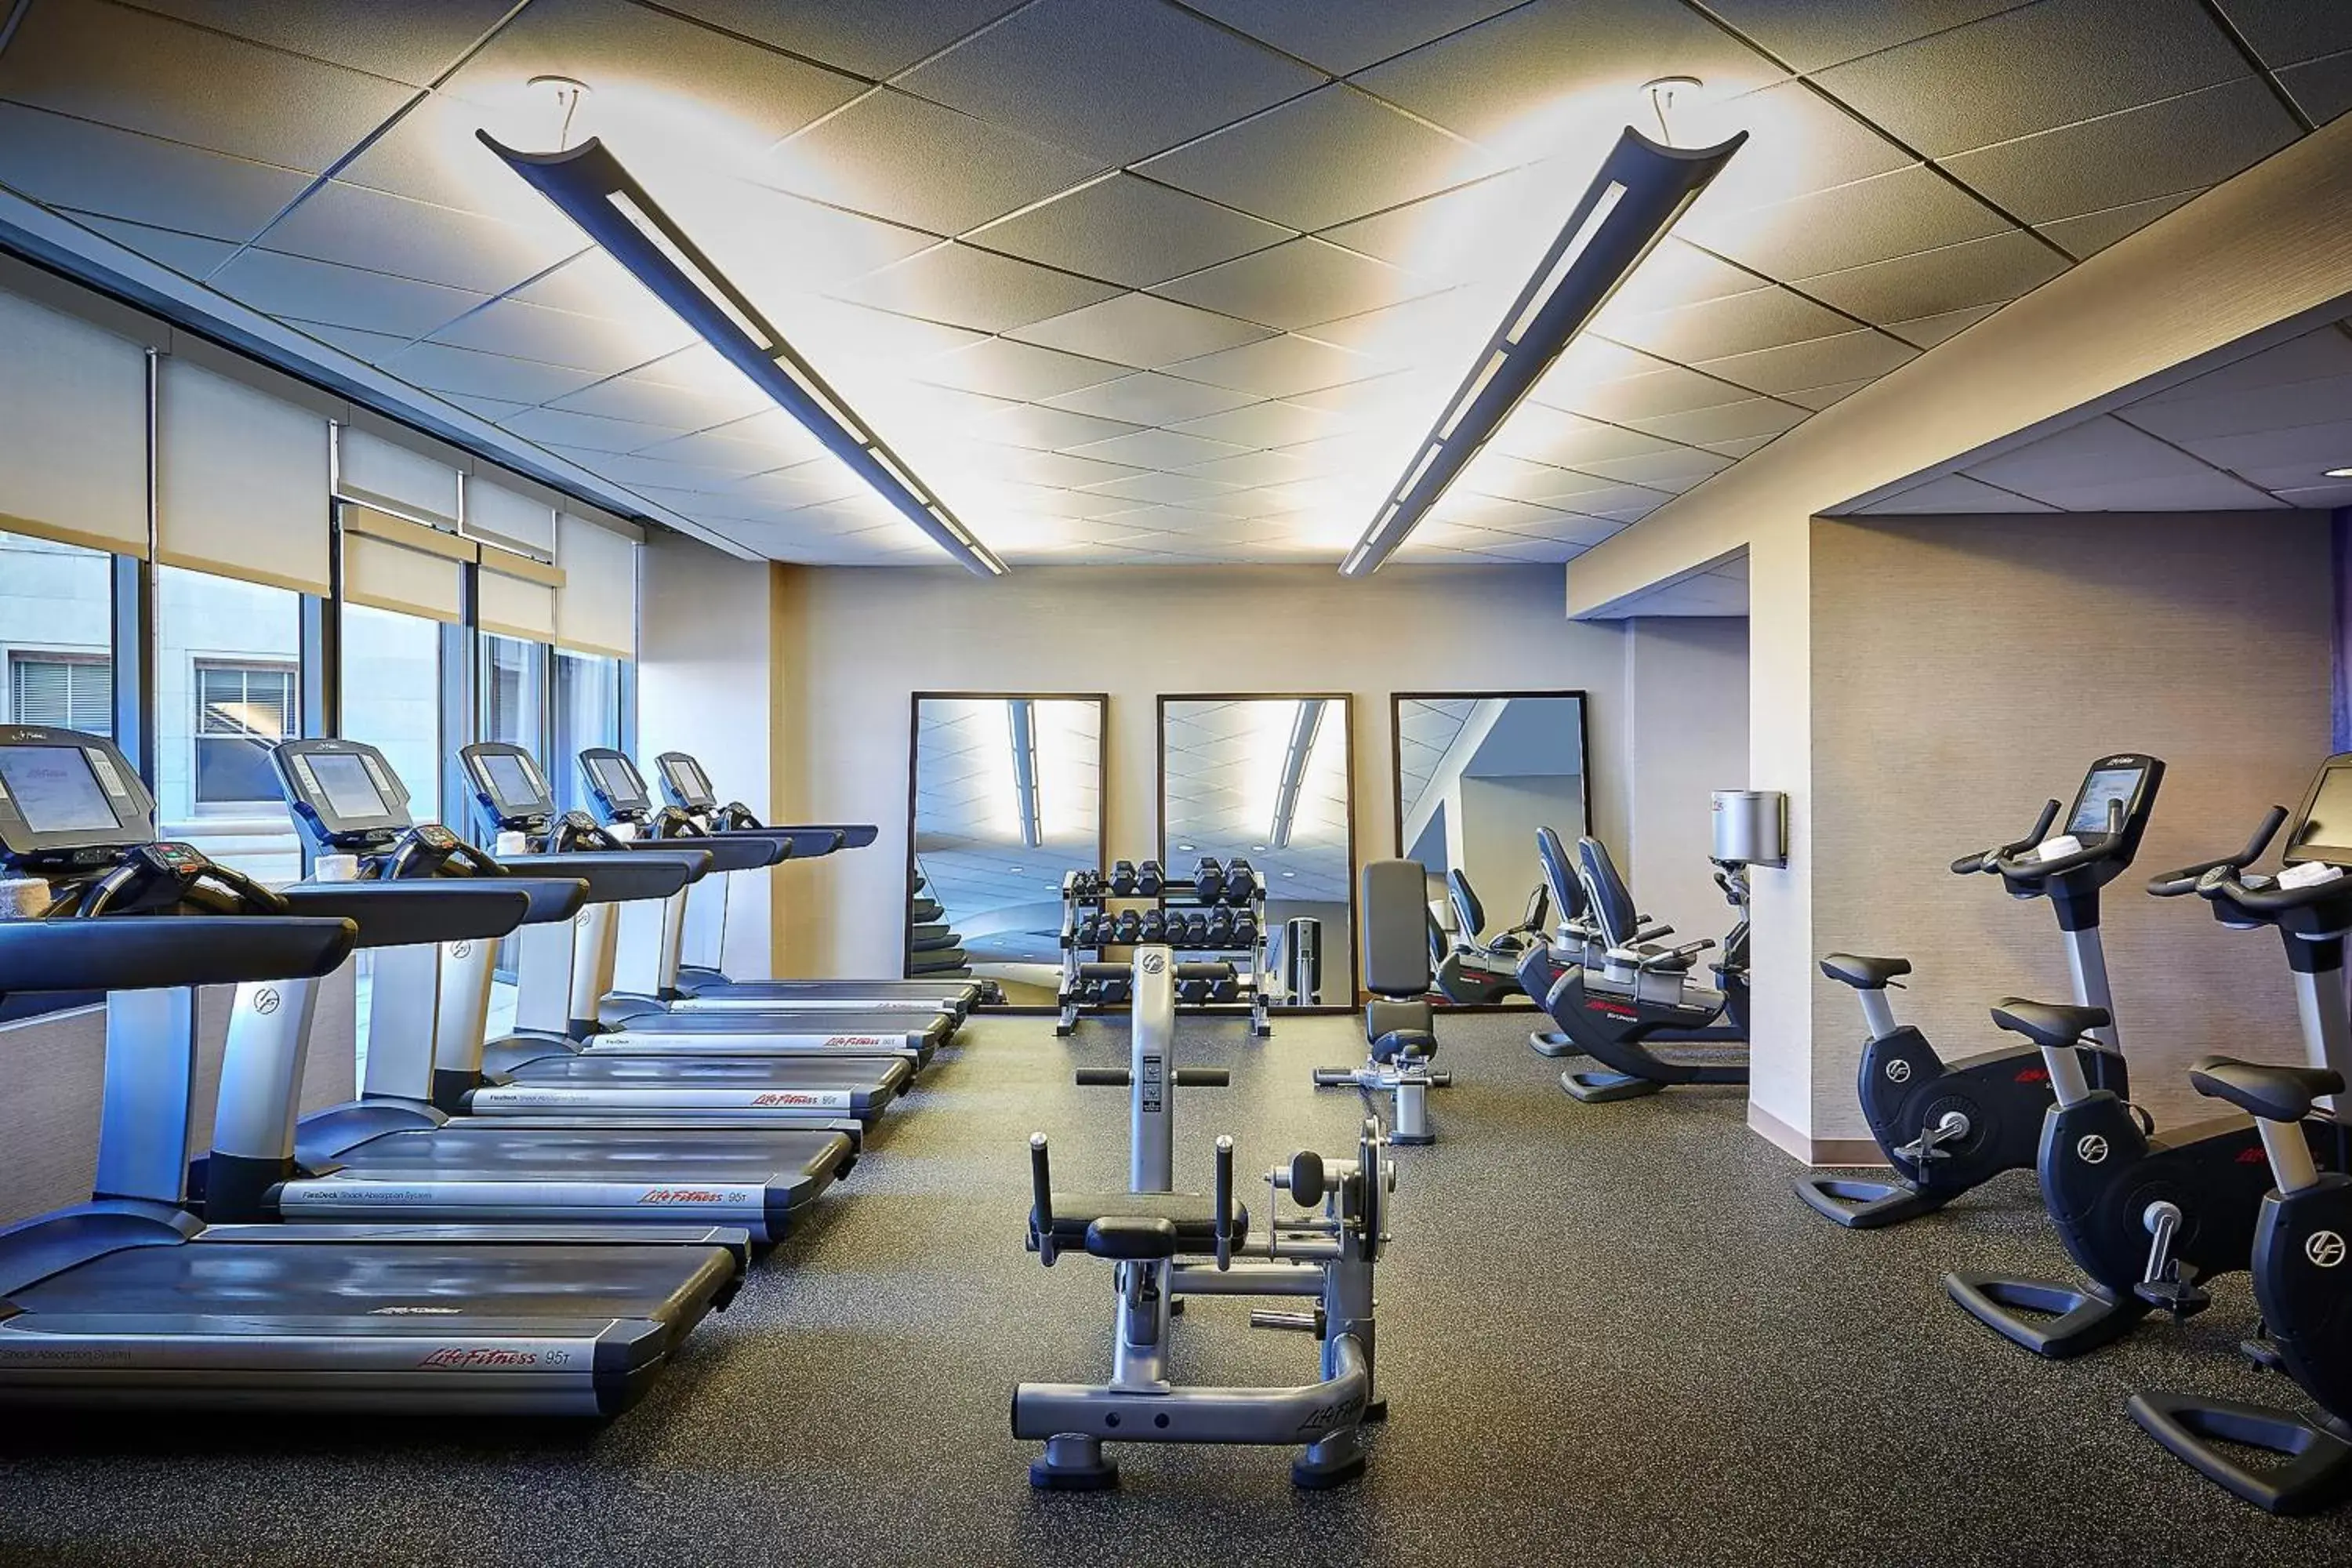 Fitness centre/facilities, Fitness Center/Facilities in JW Marriott New Orleans